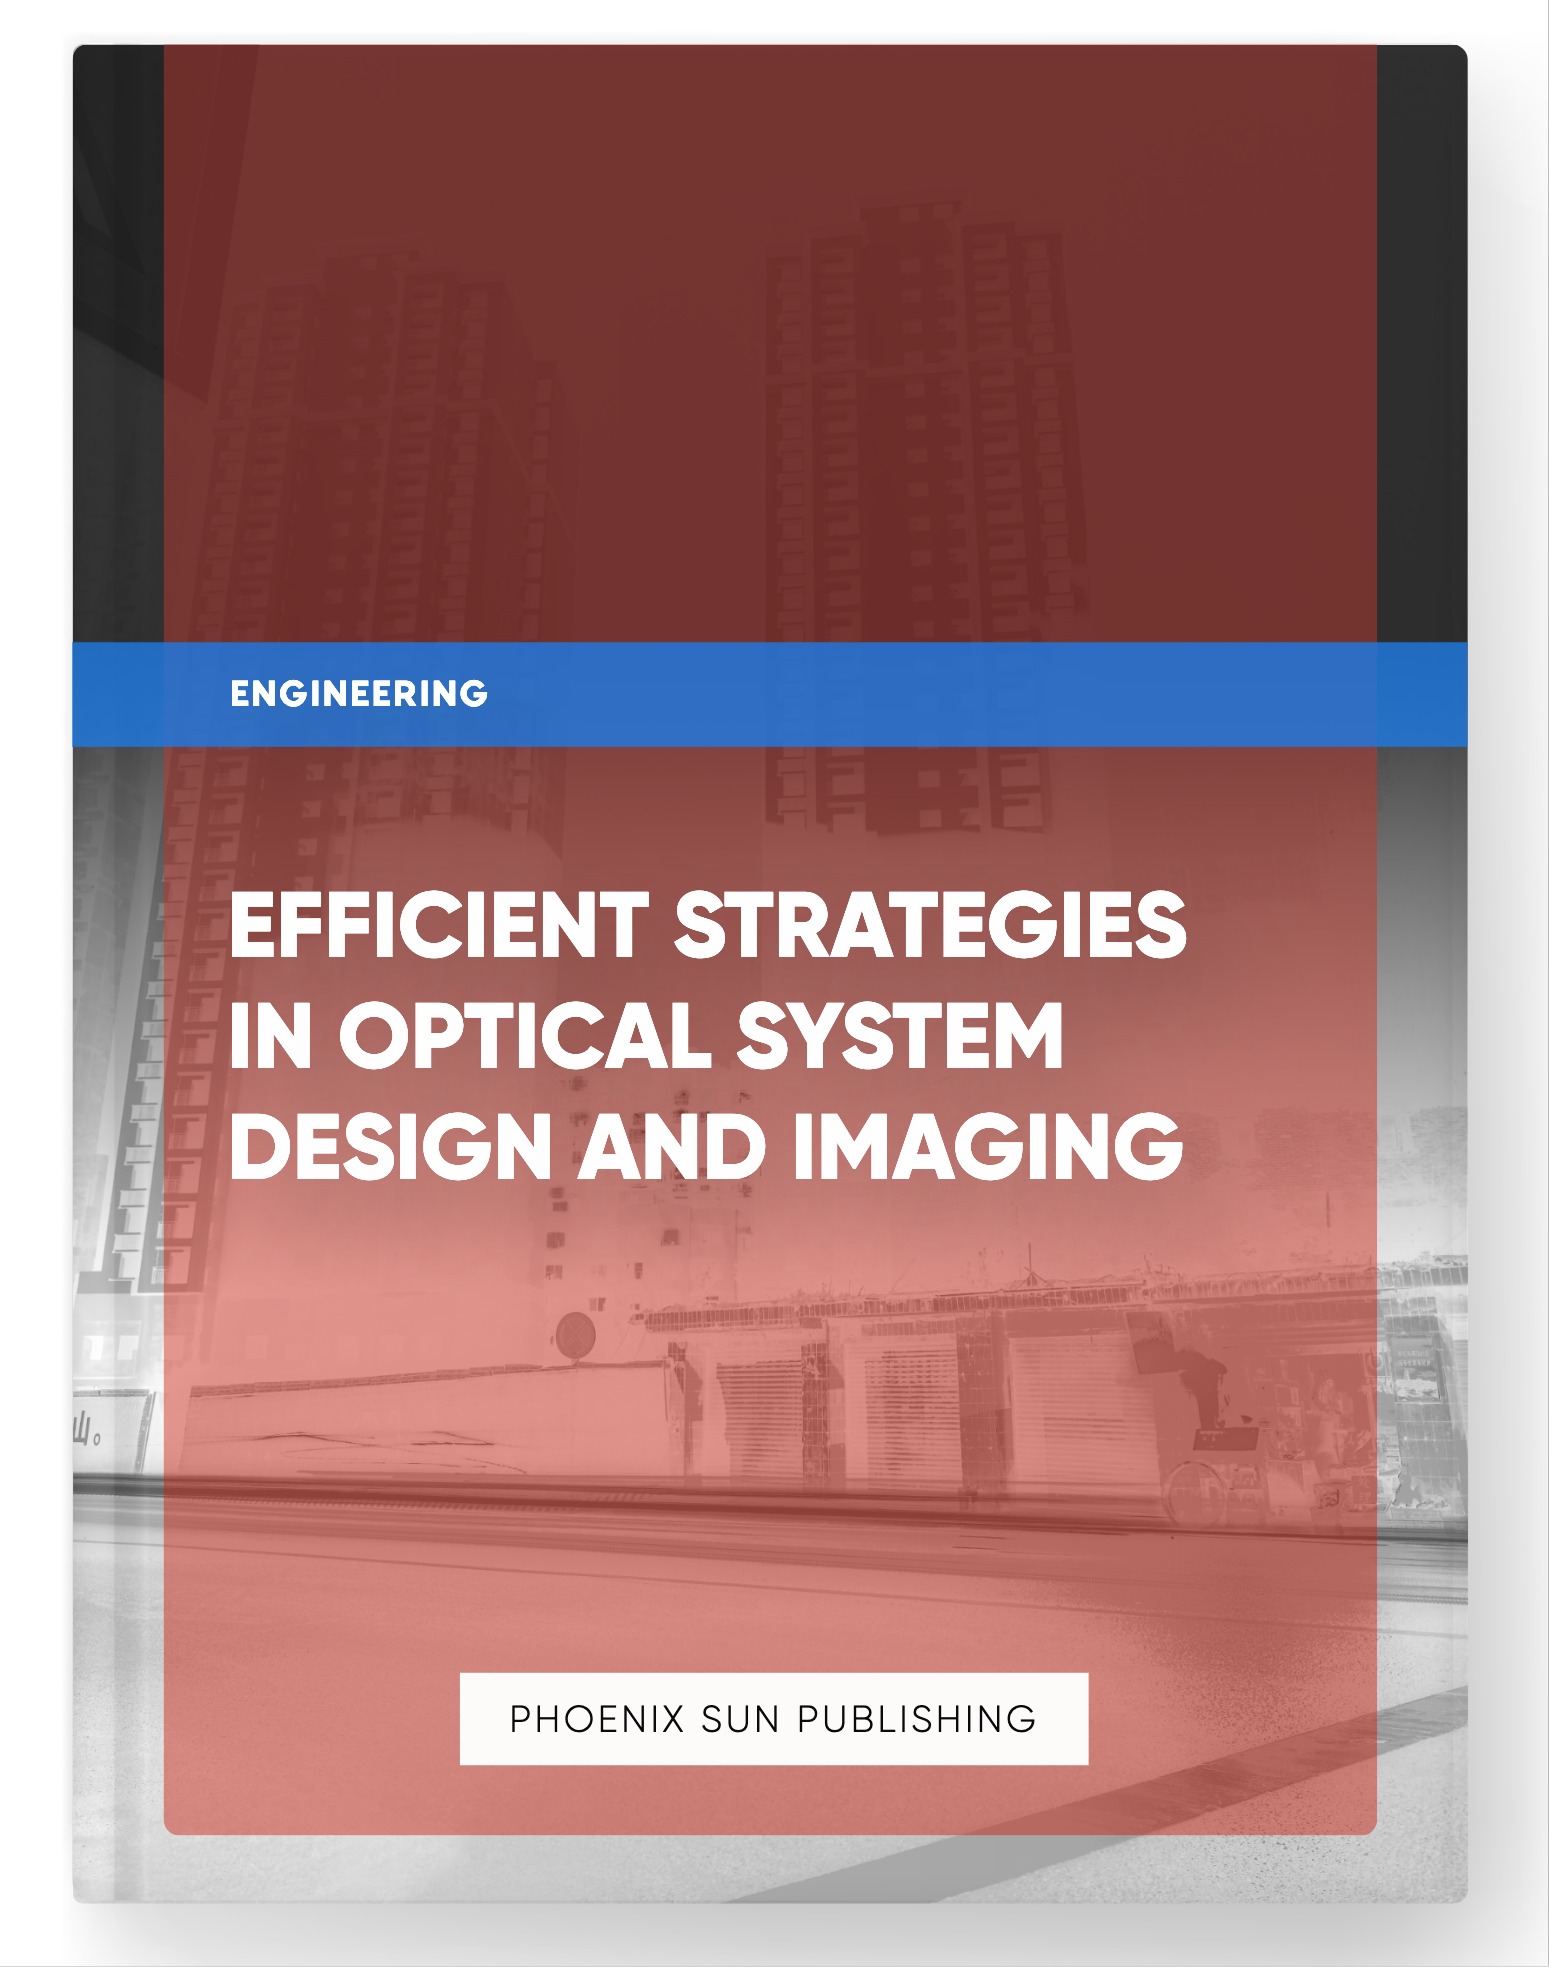 Efficient Strategies in Optical System Design and Imaging